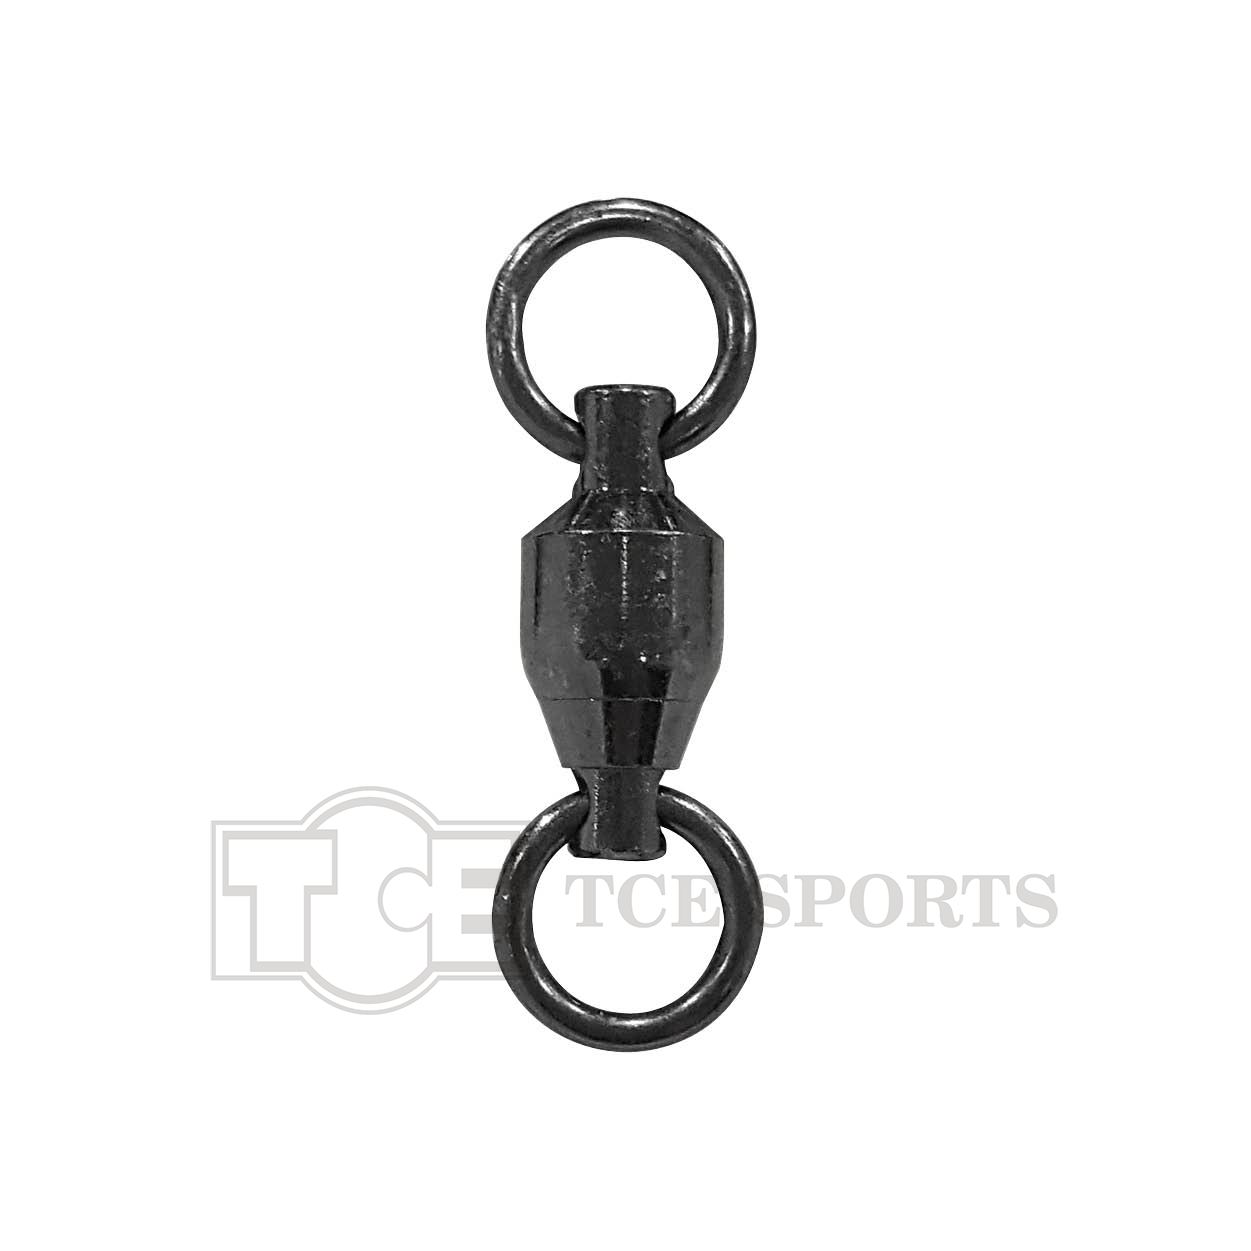 Seahawk - Ball Bearing Swivel With Solid Ring - YM1804B Main